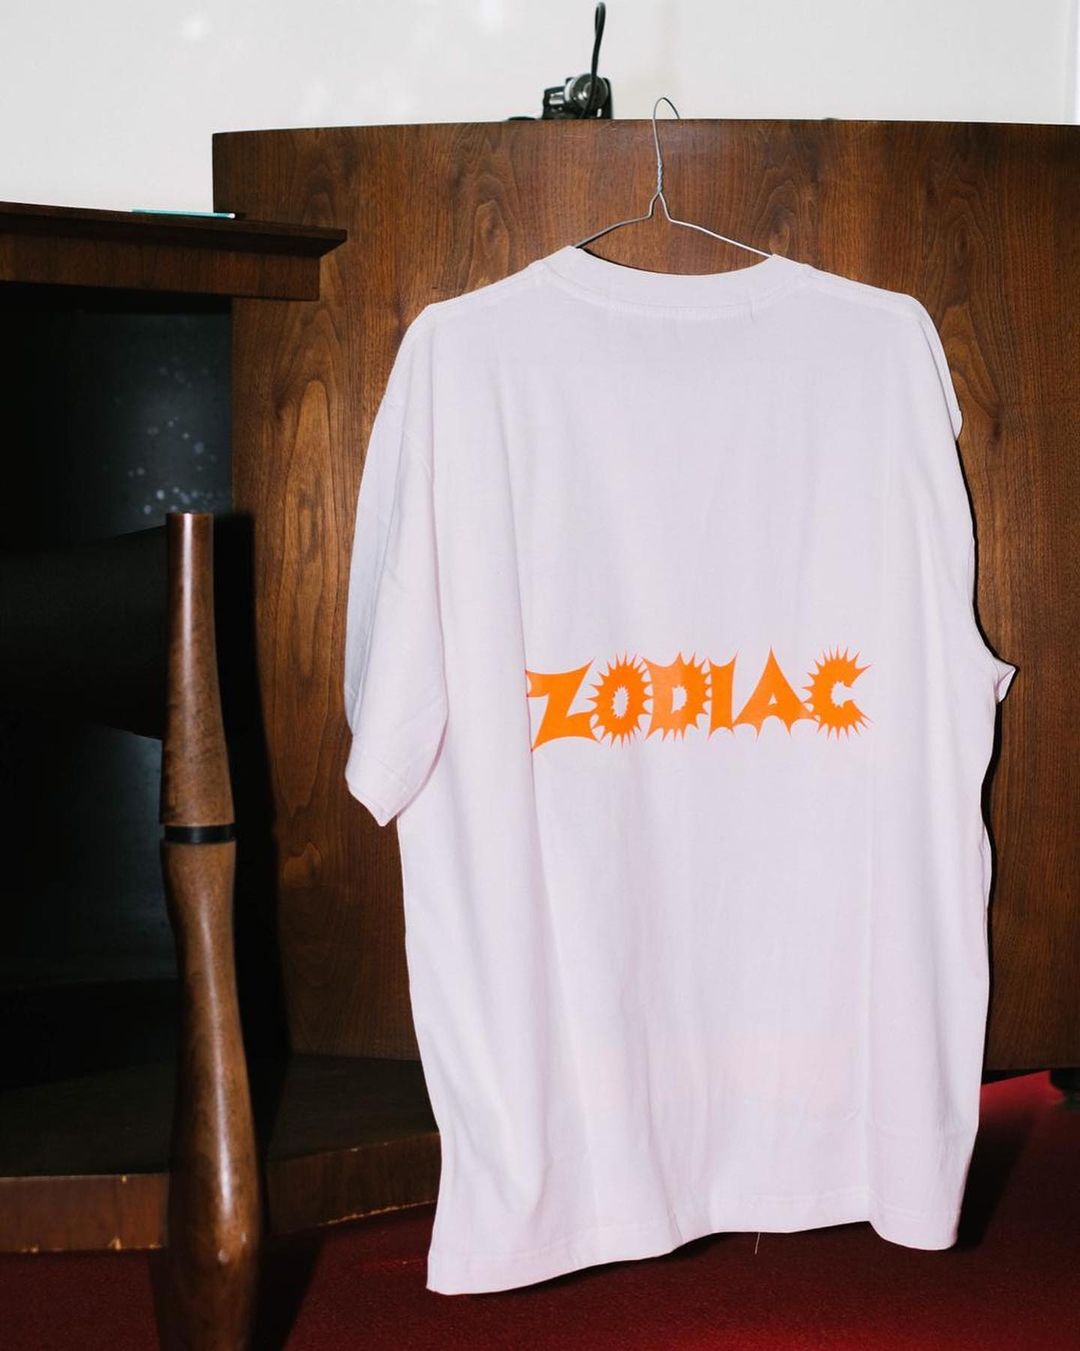 20 T-SHIRT BRANDS YOU SHOULD KNOW IN 2022